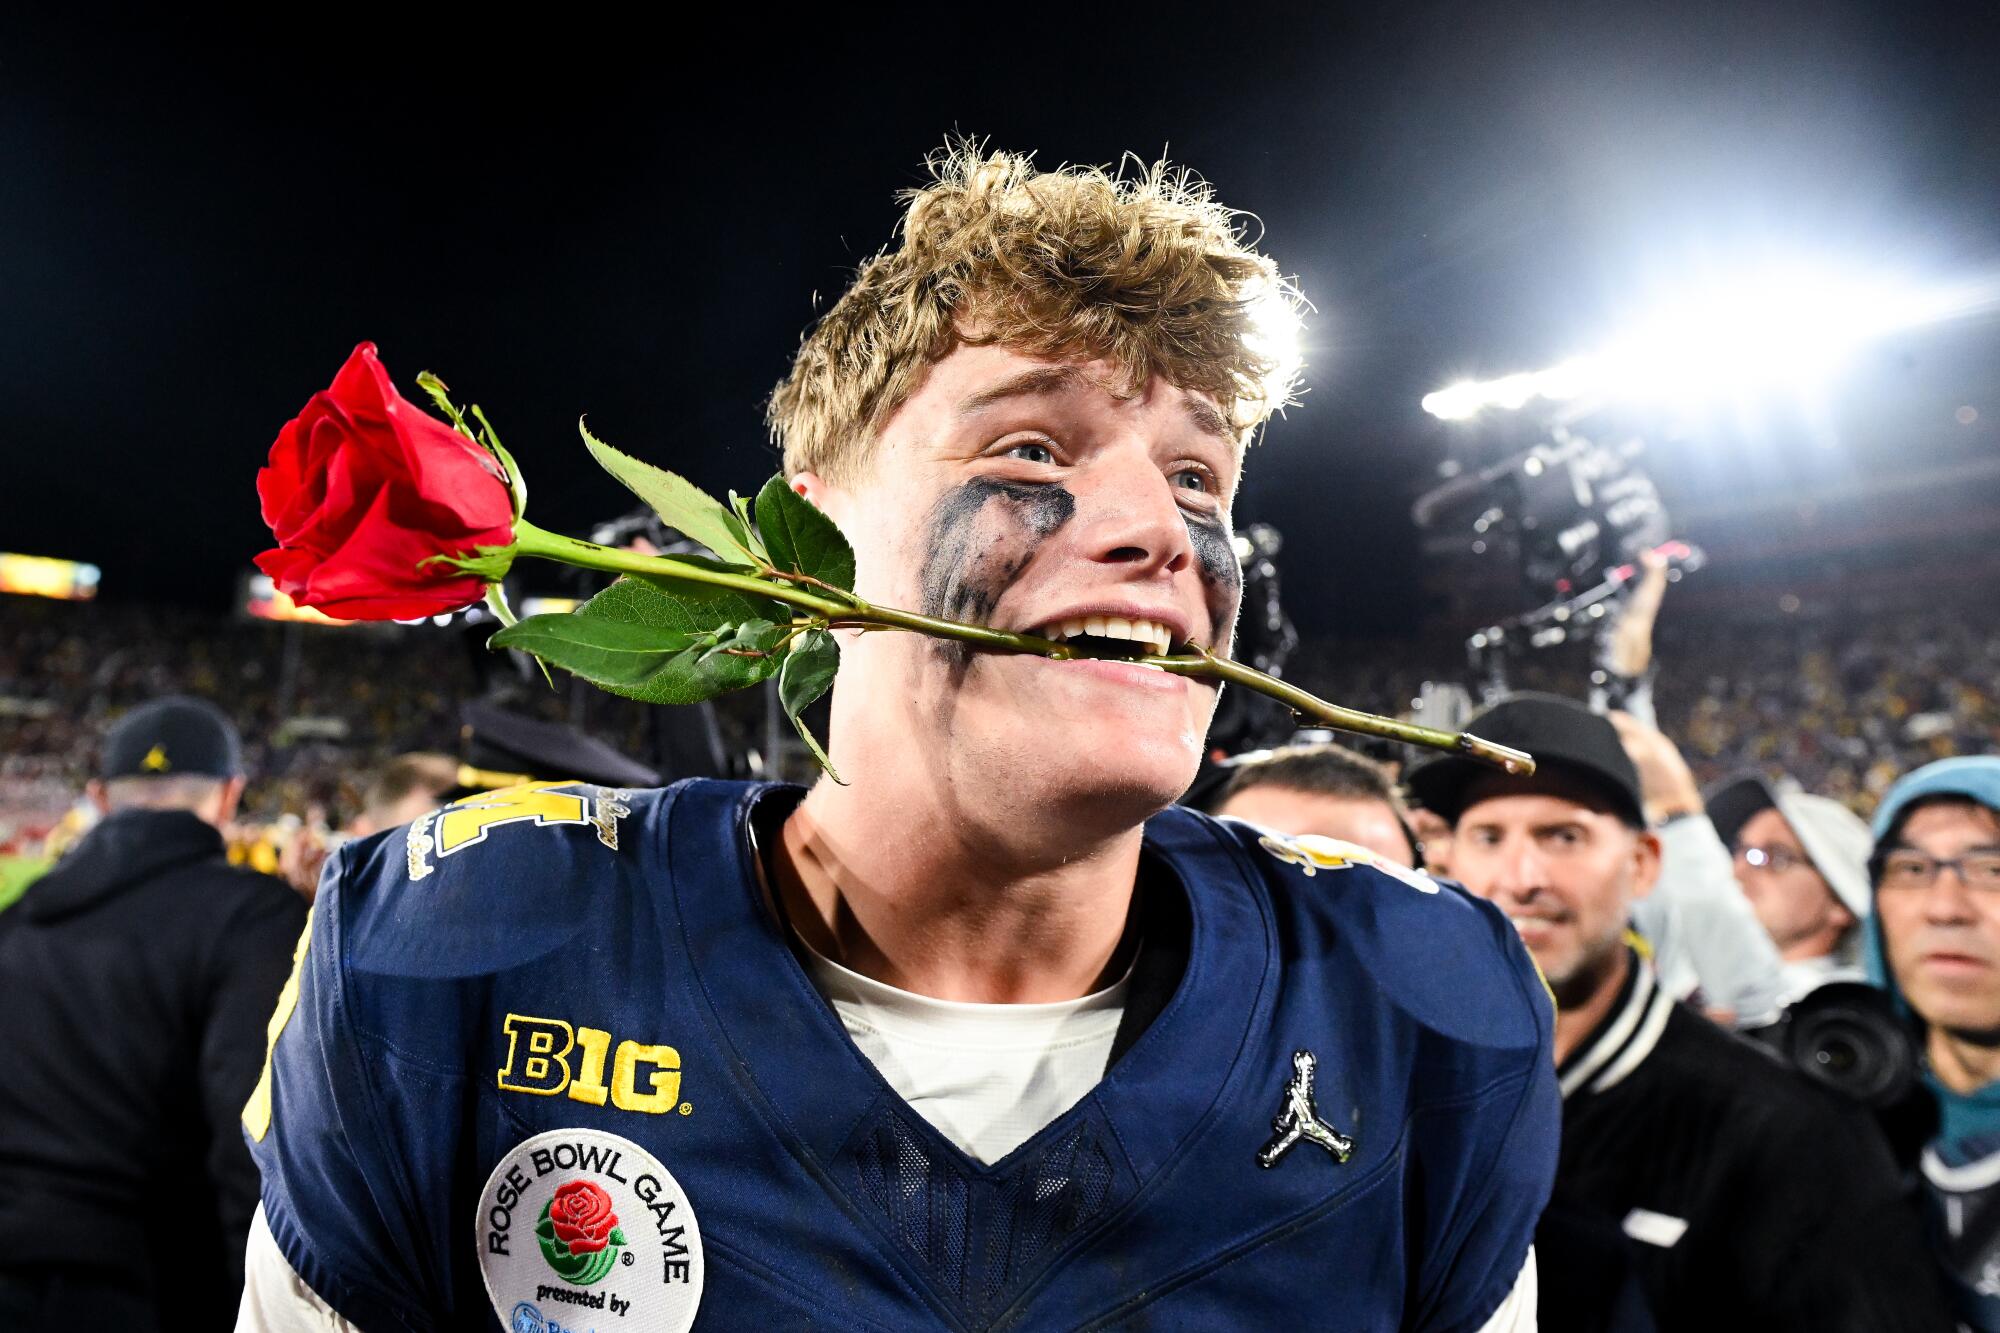 Michigan quarterback J.J. McCarthy celebrates after the Wolverines' 27-20 overtime win over Alabama in the Rose Bowl.